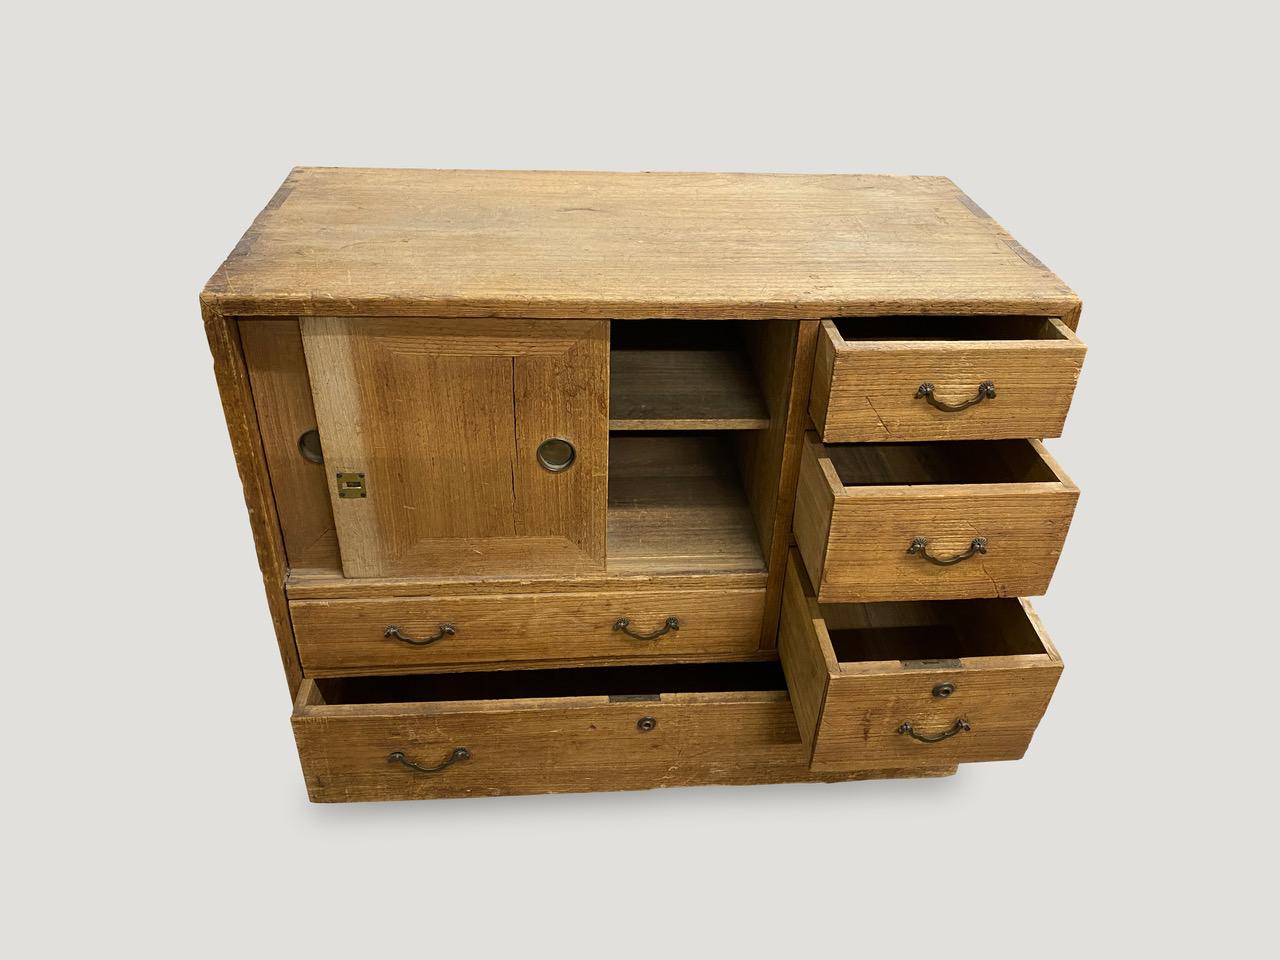 Japanese Kiri wood wabi sabi clothing chest from the 20th century in this hard to find miniature size. Great for storing jewelry, make up or accessories.

This miniature chest was sourced in the spirit of wabi-sabi, a Japanese philosophy that